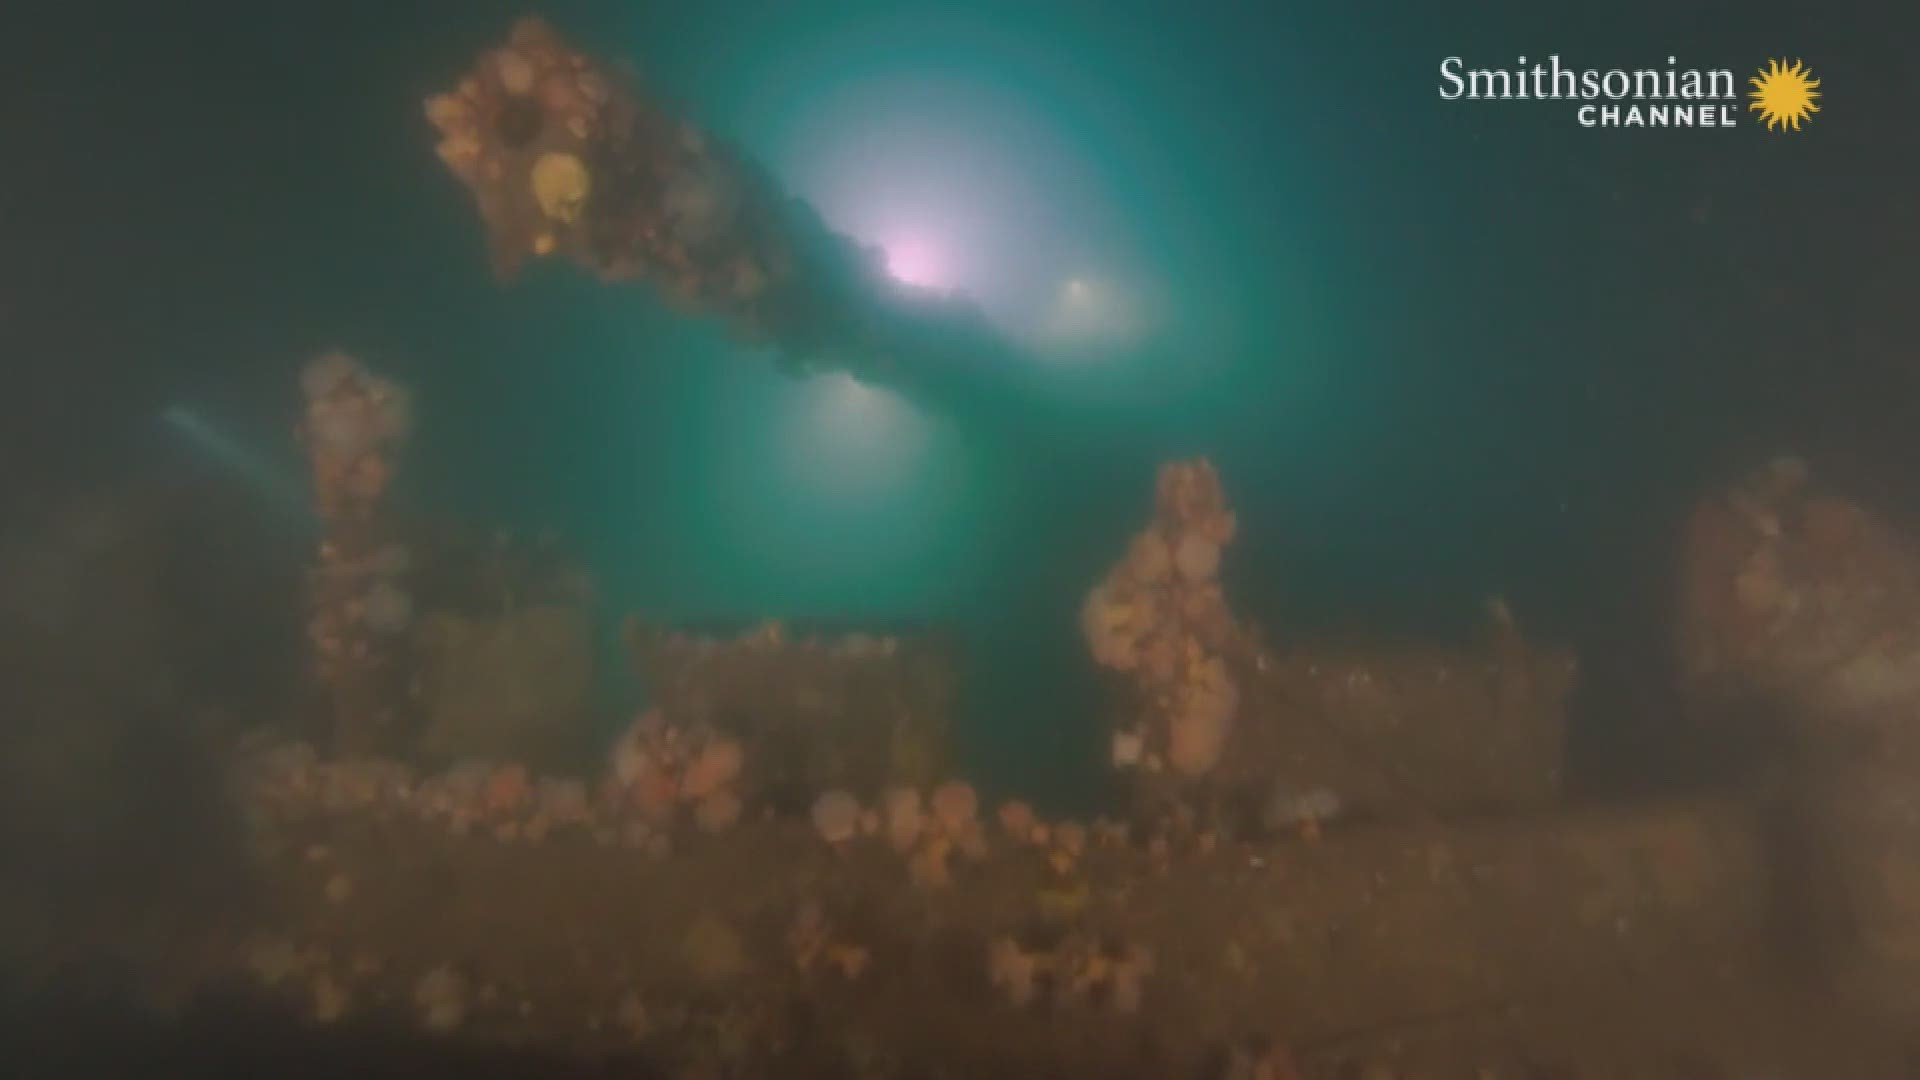 A Maine production company documented the dive to the sunken navy ship for a Smithsonian documentary.